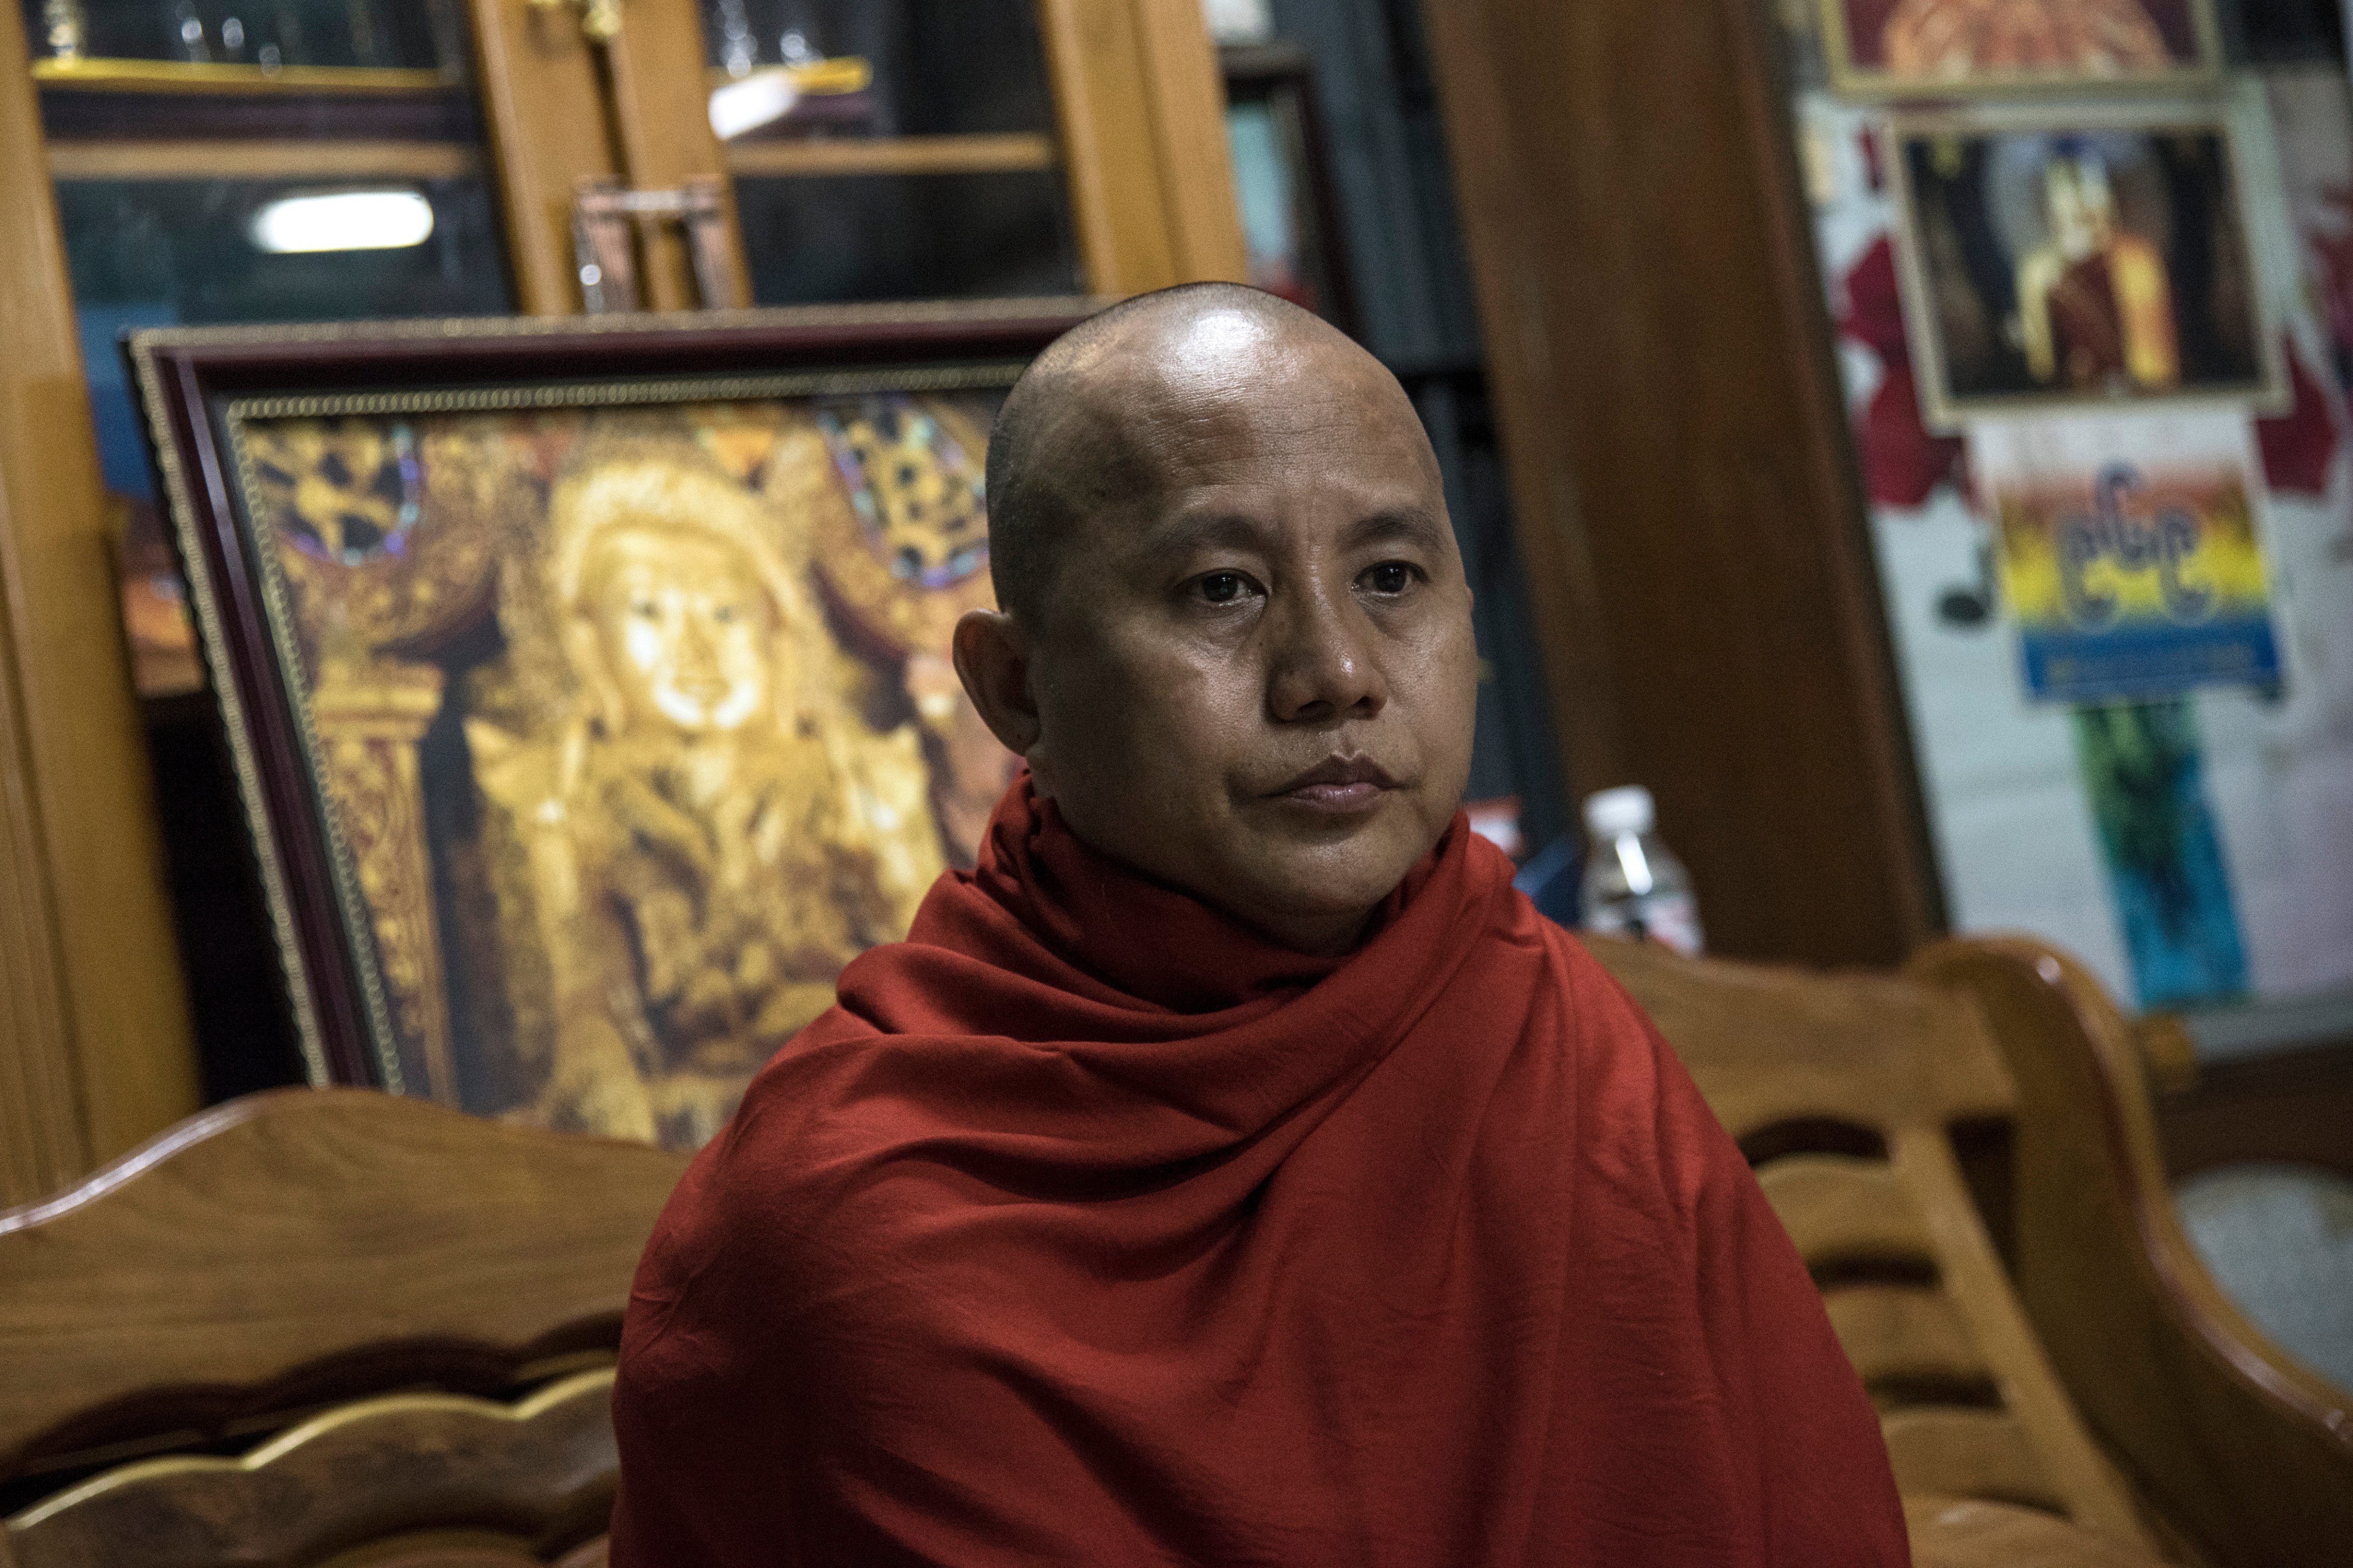 Buddhist monk Wirathu sits in his quarters at Ma Soe Yein